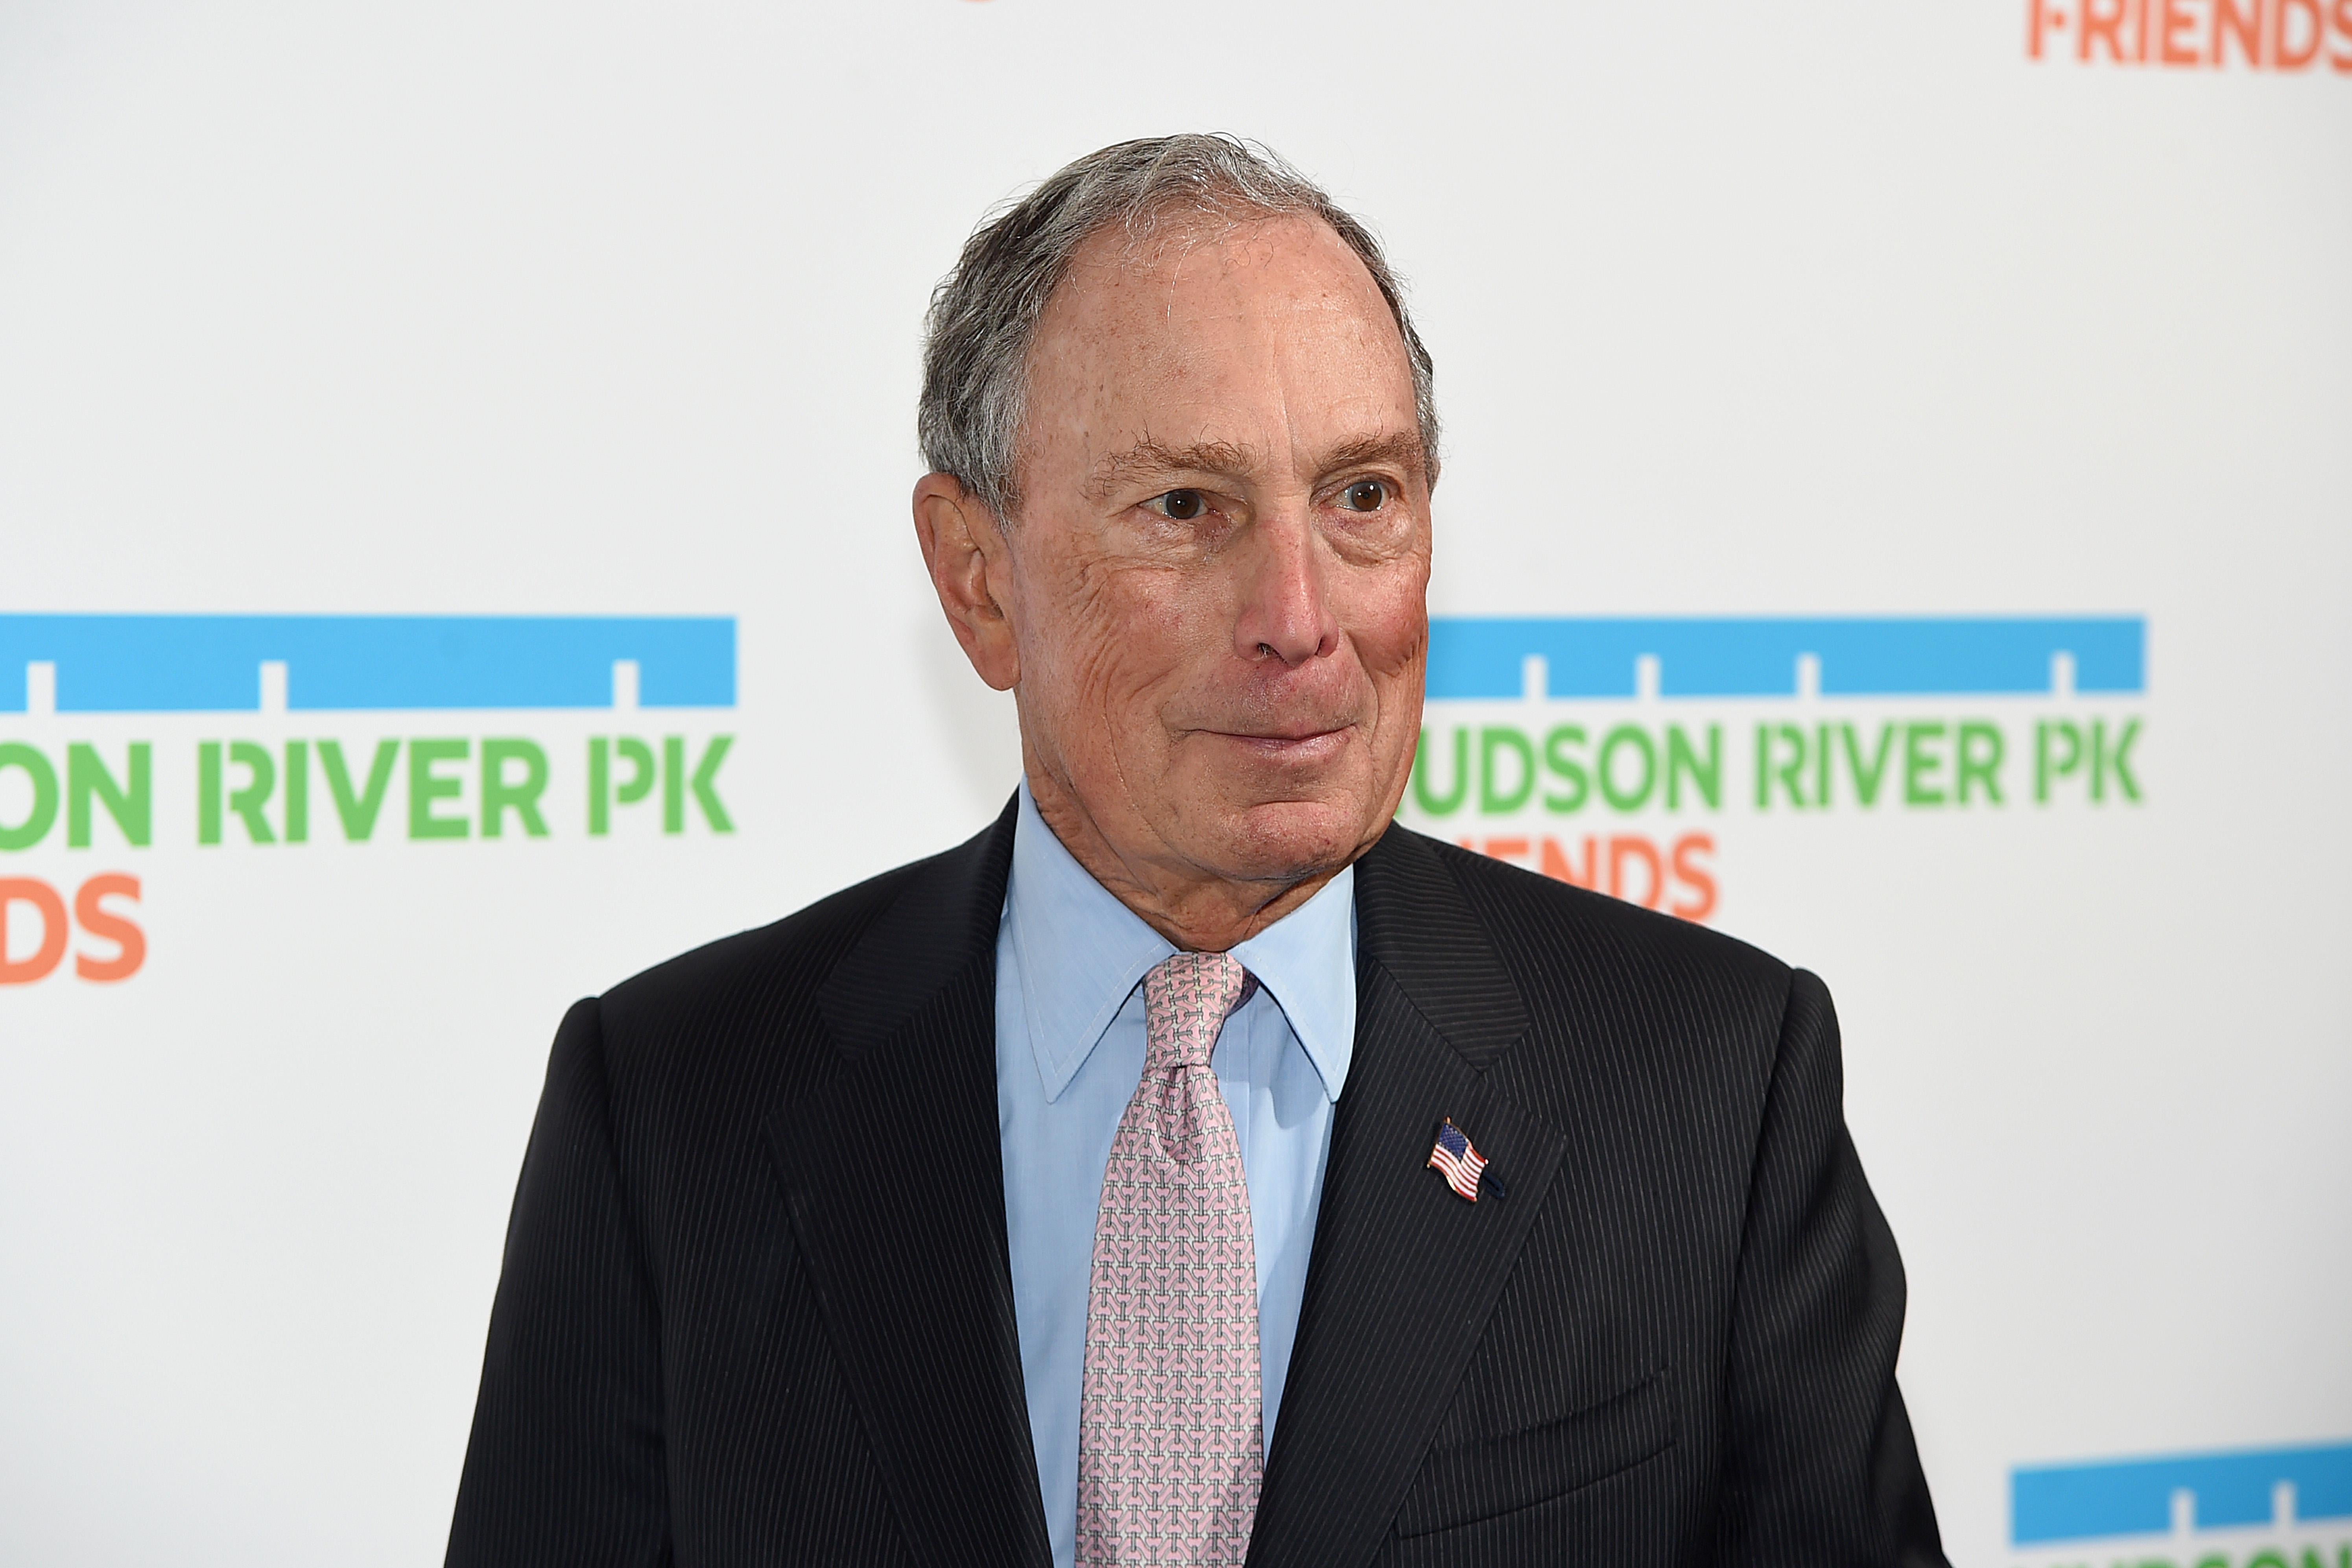 Michael Bloomberg attends the Hudson River Park Annual Gala at Cipriani South Street on October 17, 2019 in New York City.